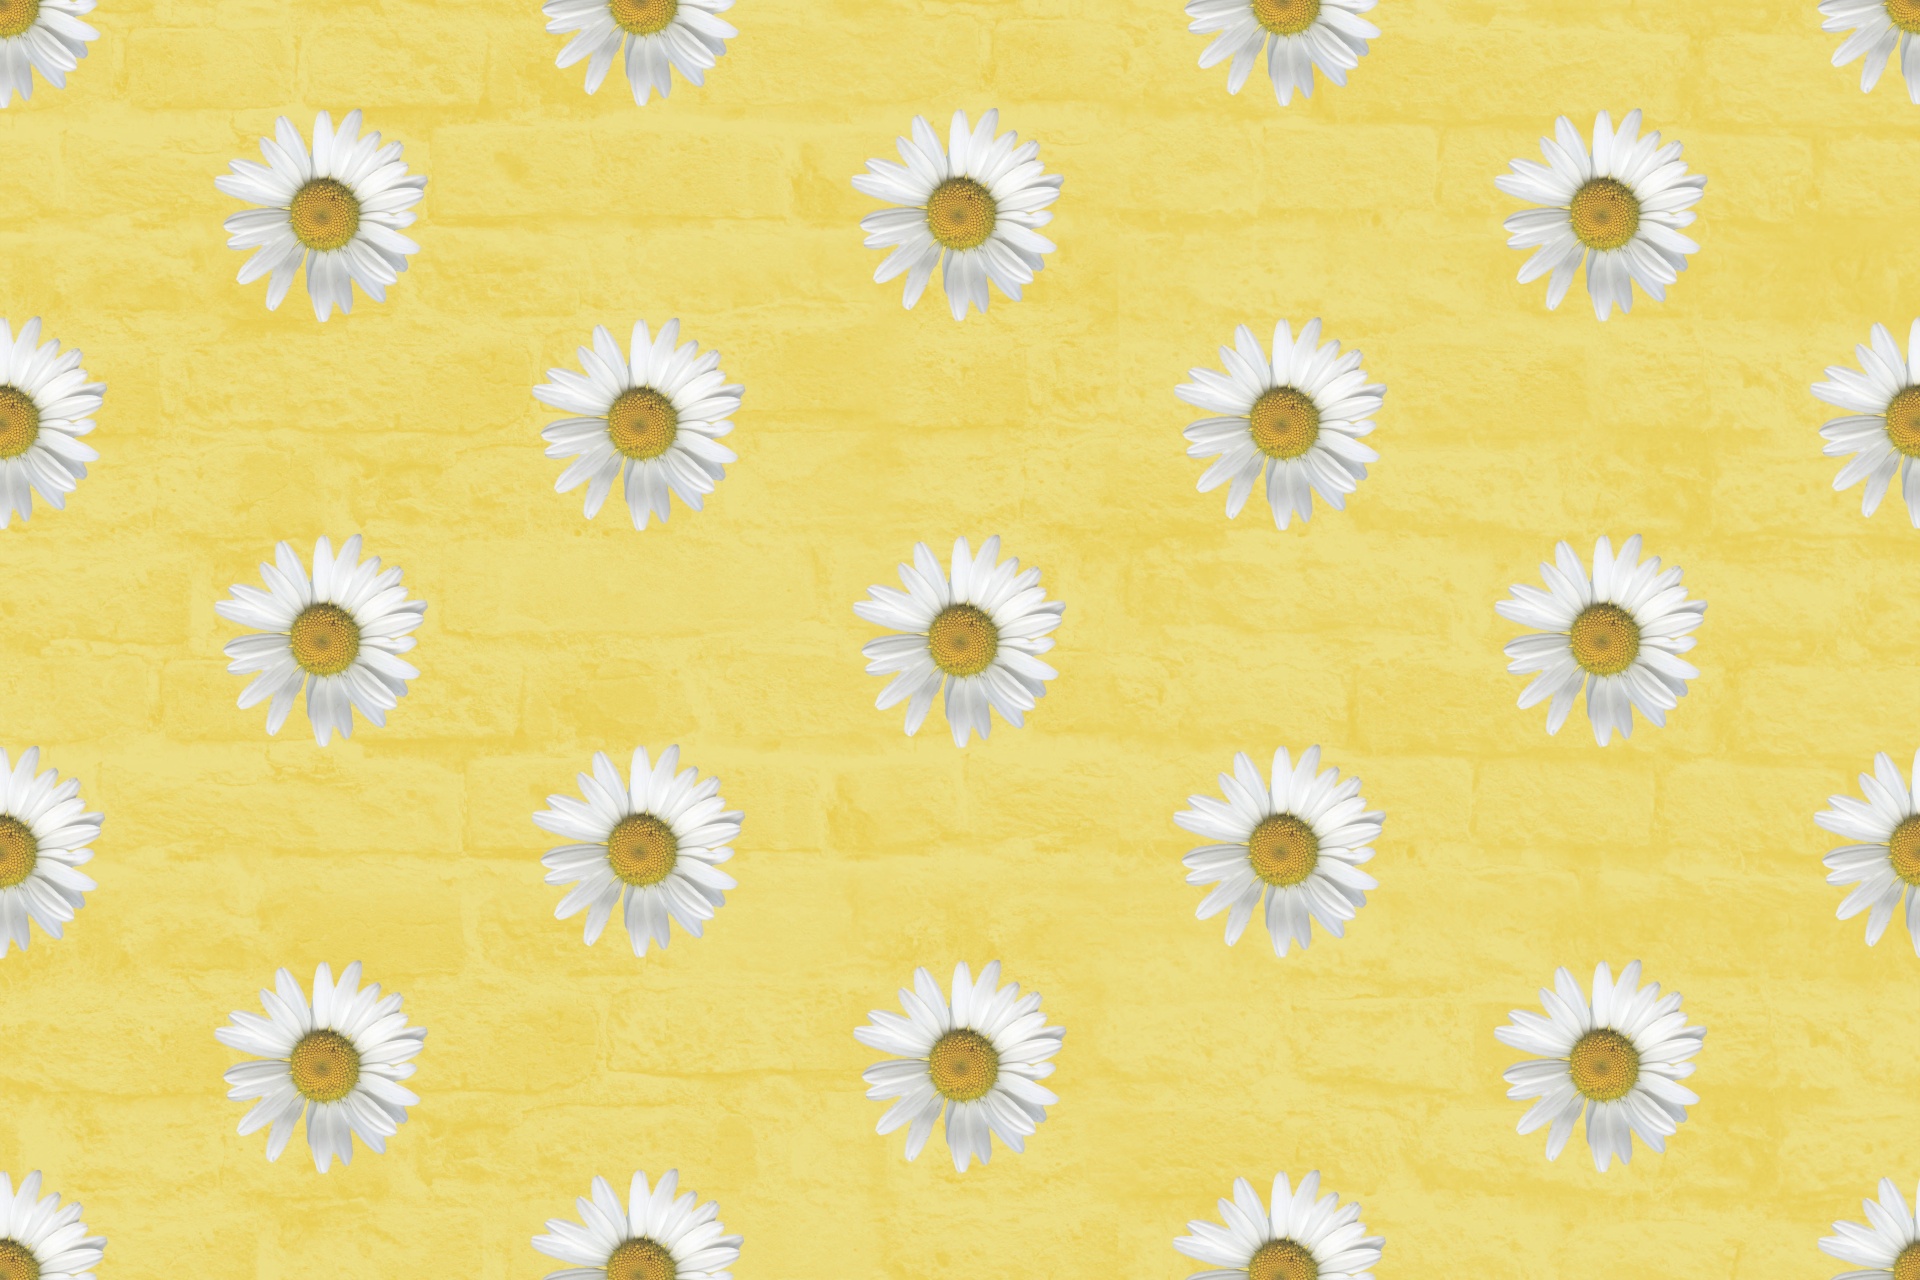 Download free photo of Background,image,yellow,daisies,daisy - from  